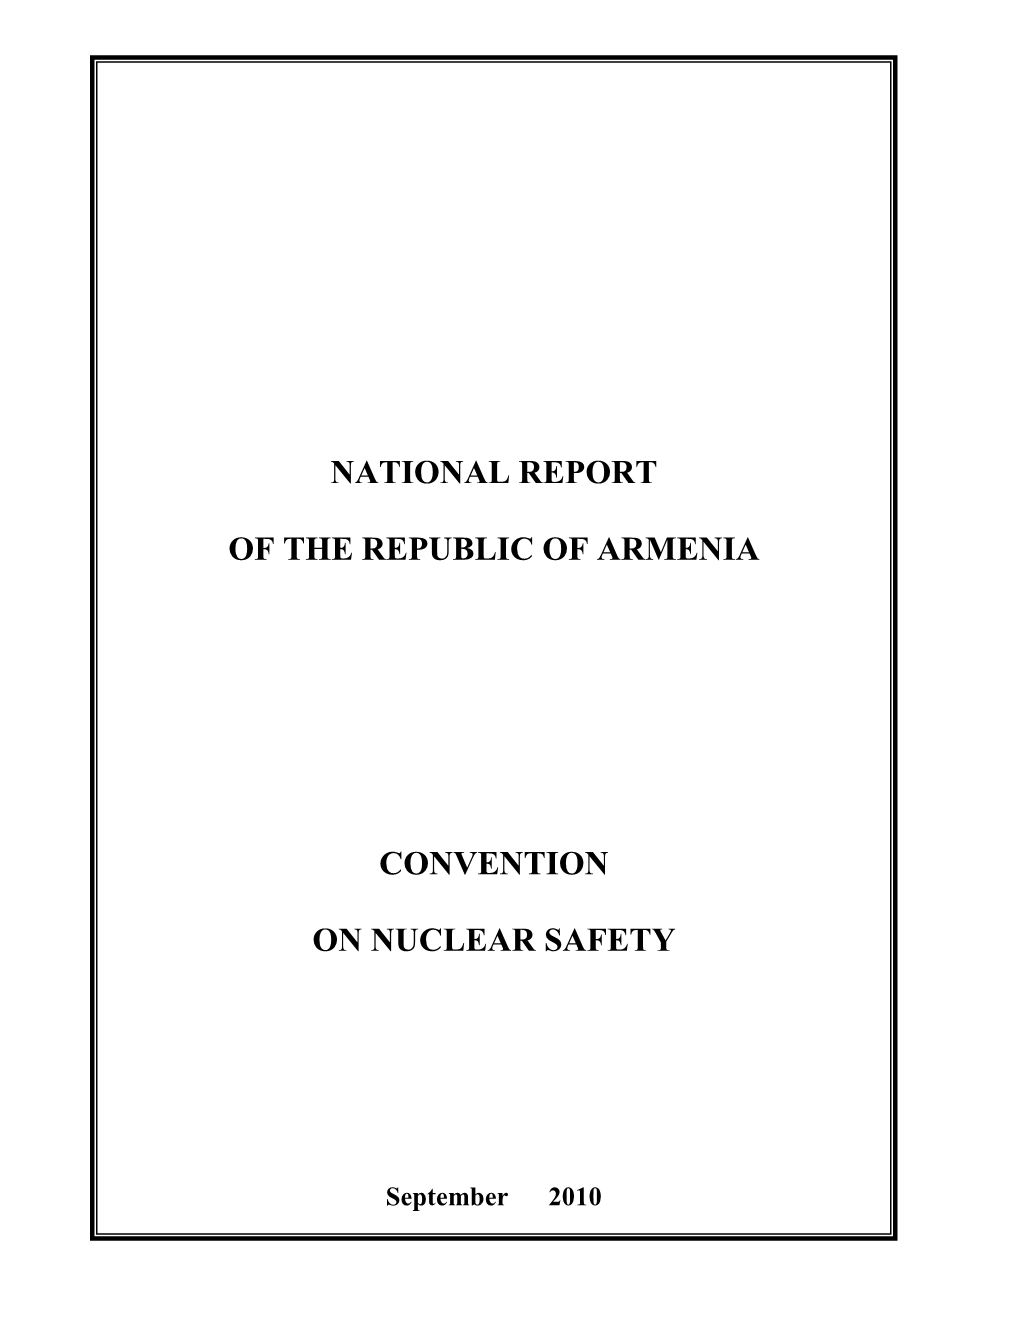 National Report of the Republic of Armenia